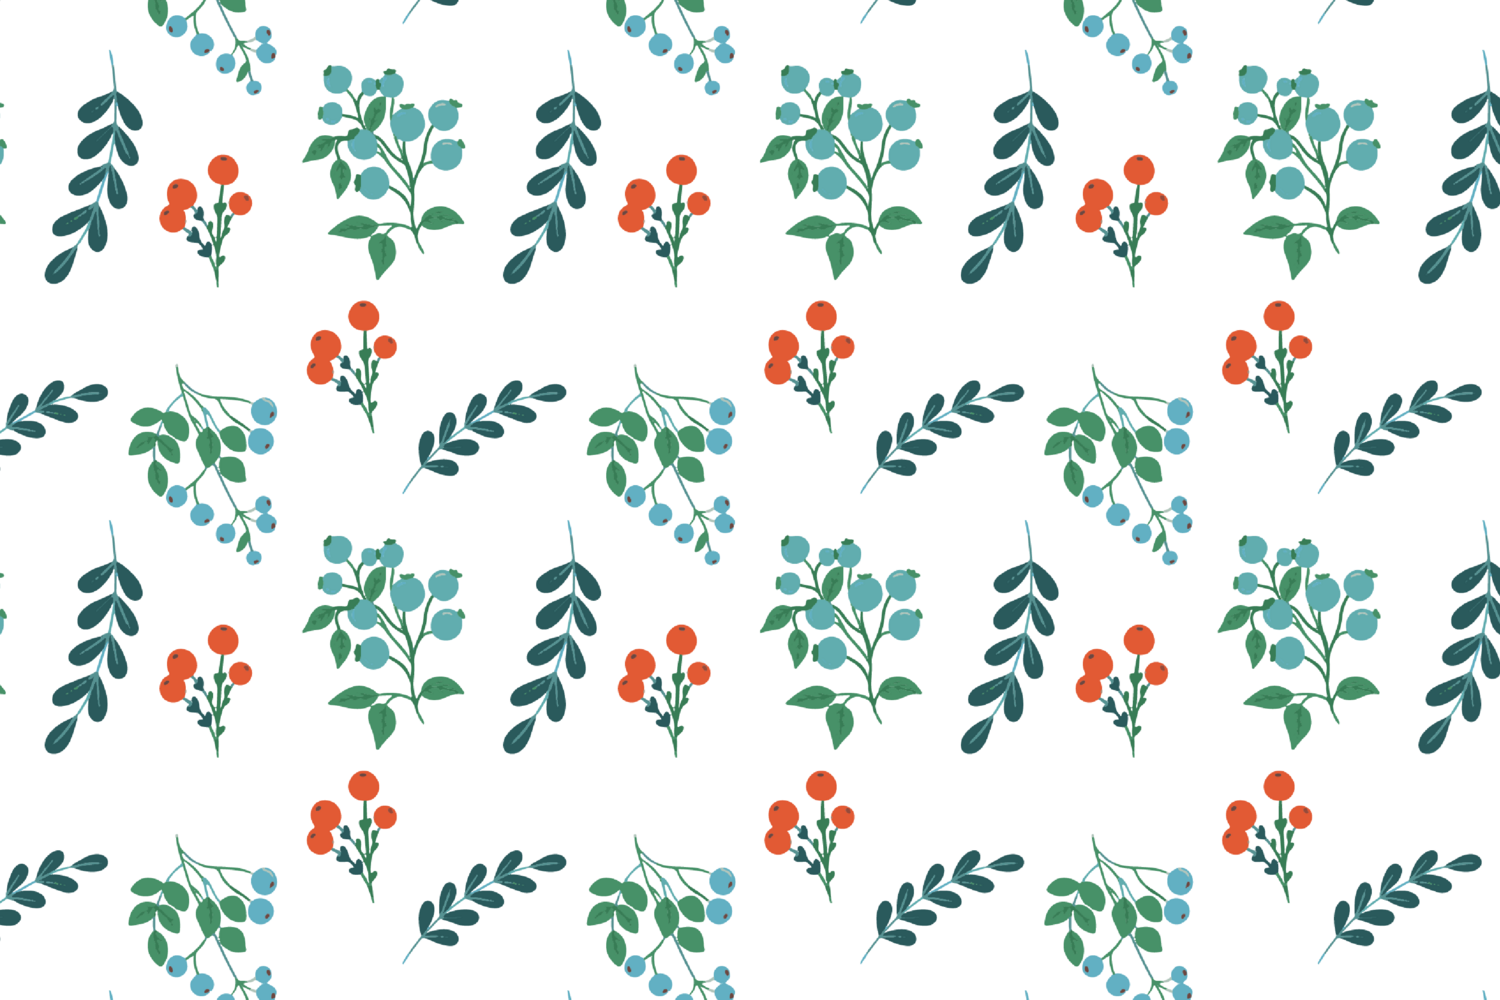 Berries and leaves pattern set pinterest preview image.